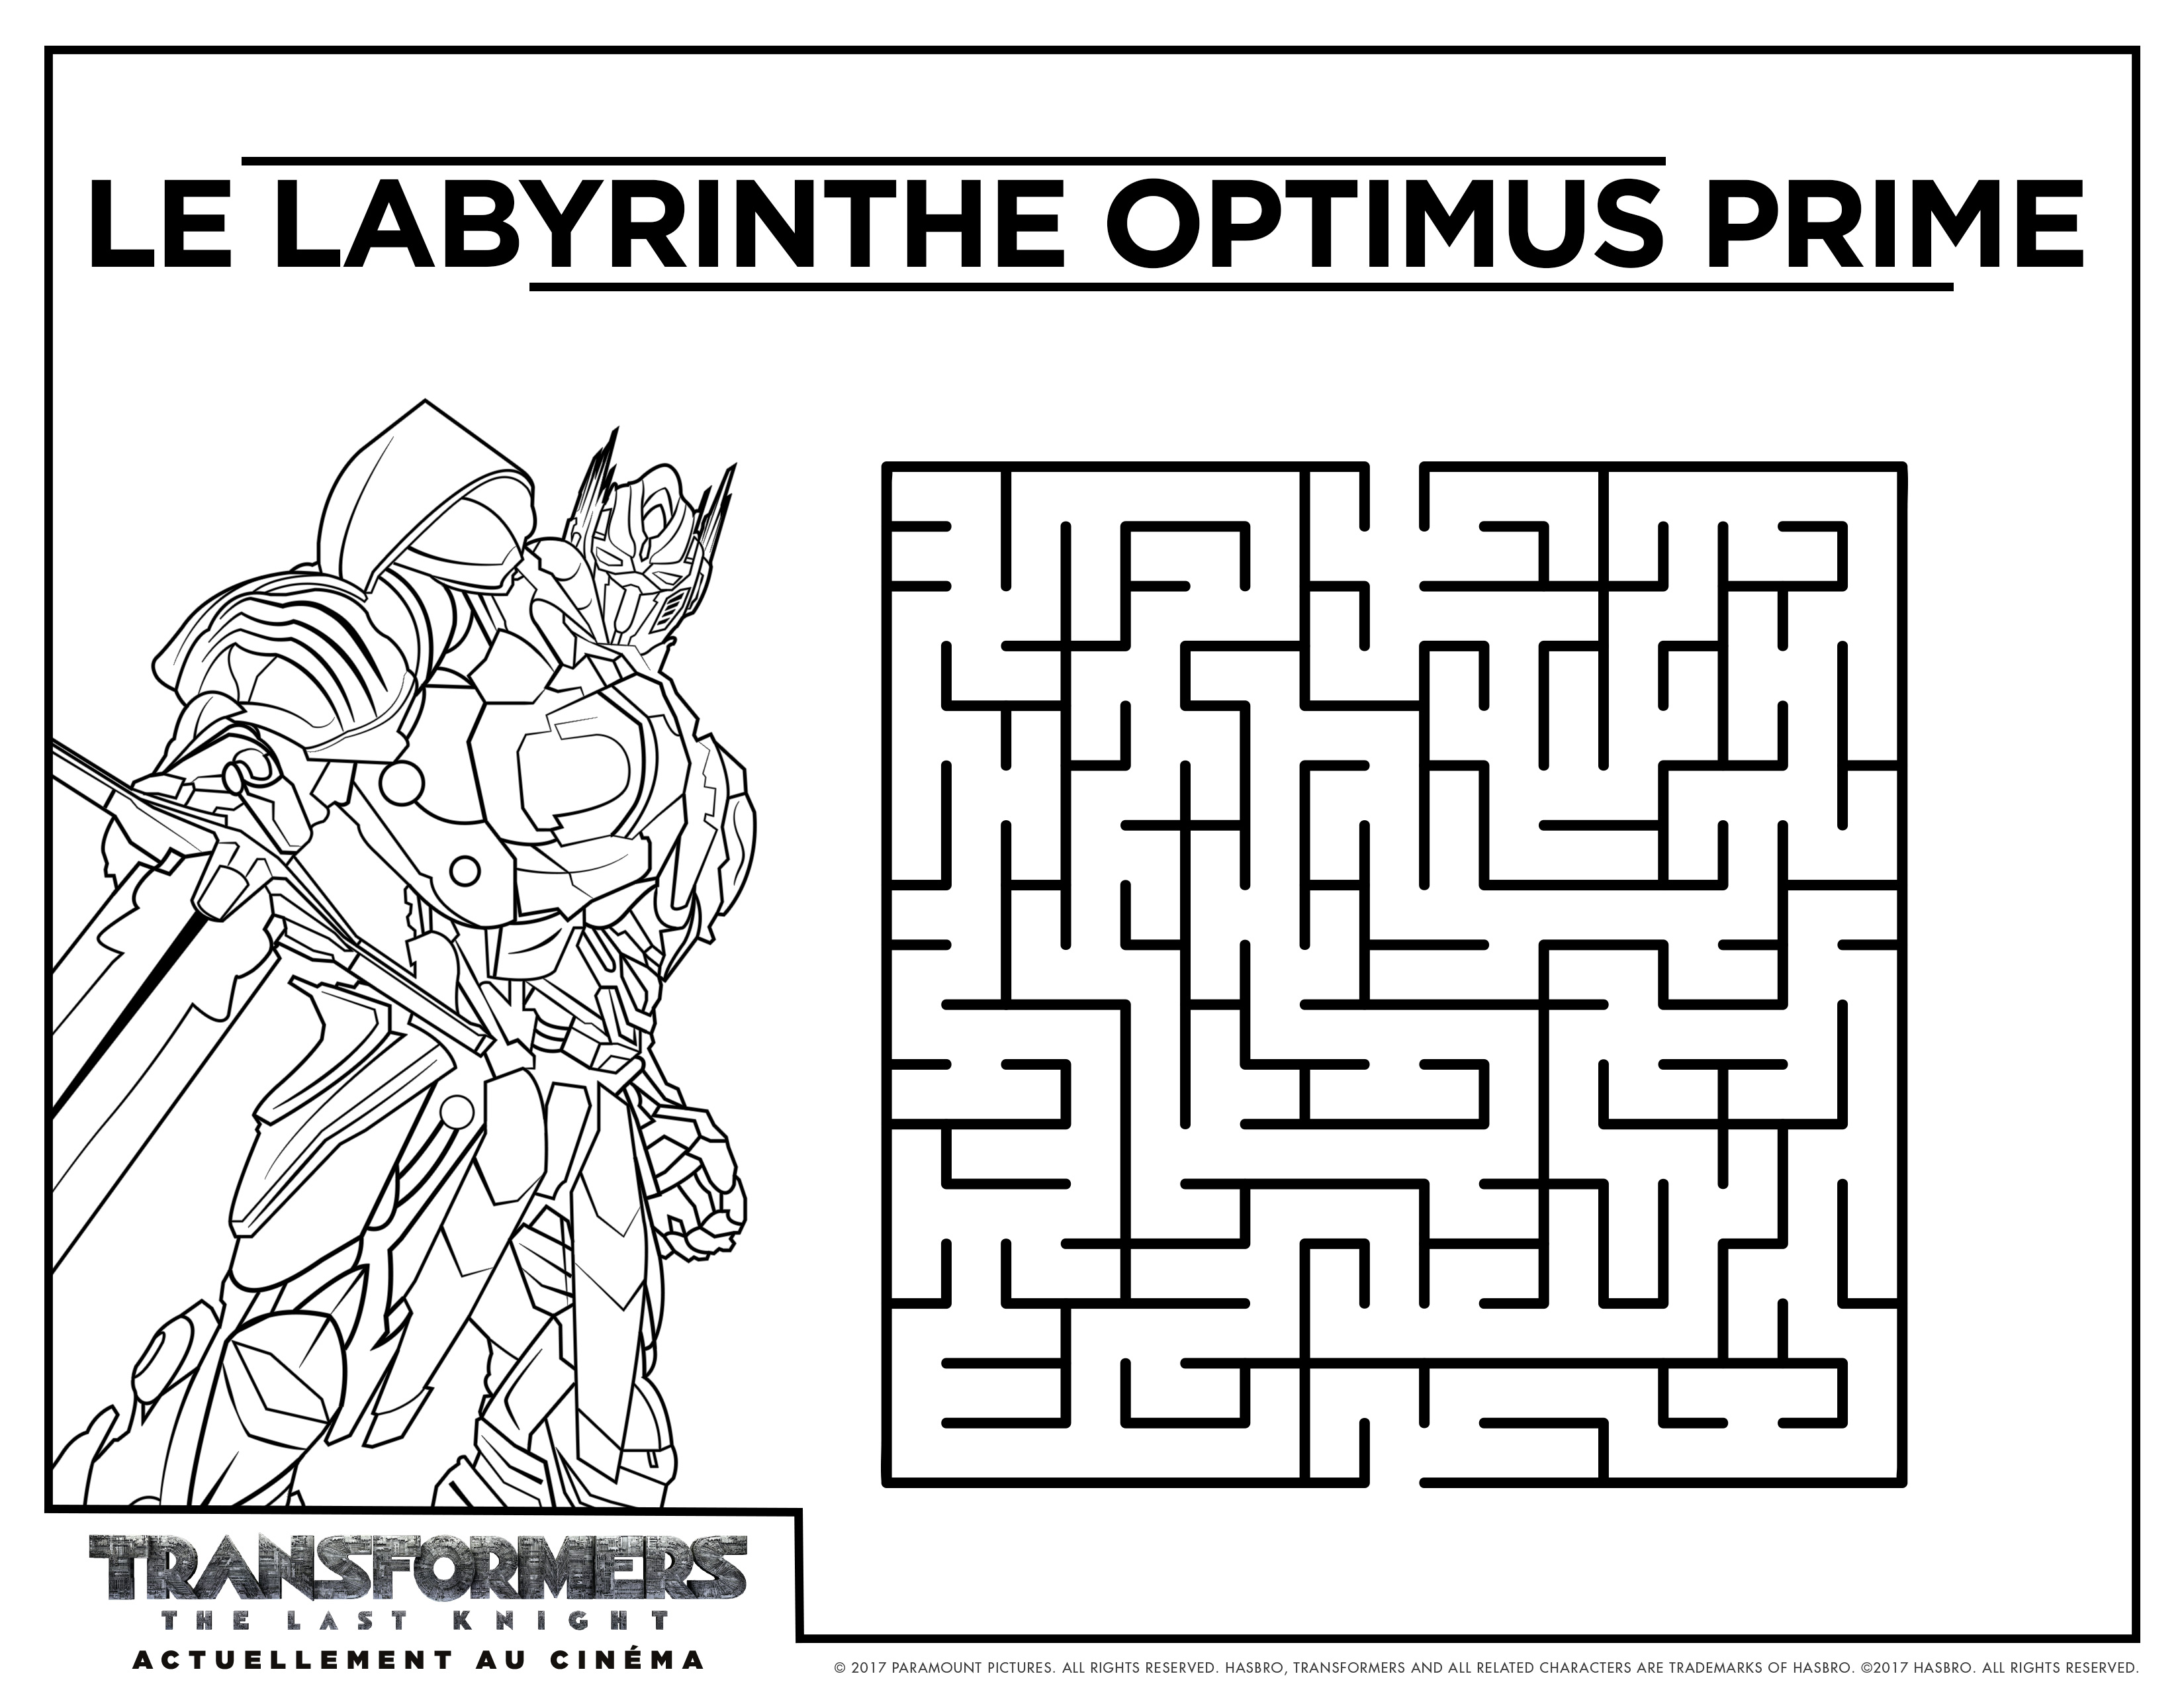 Transformers Labyrinthe 2 online game